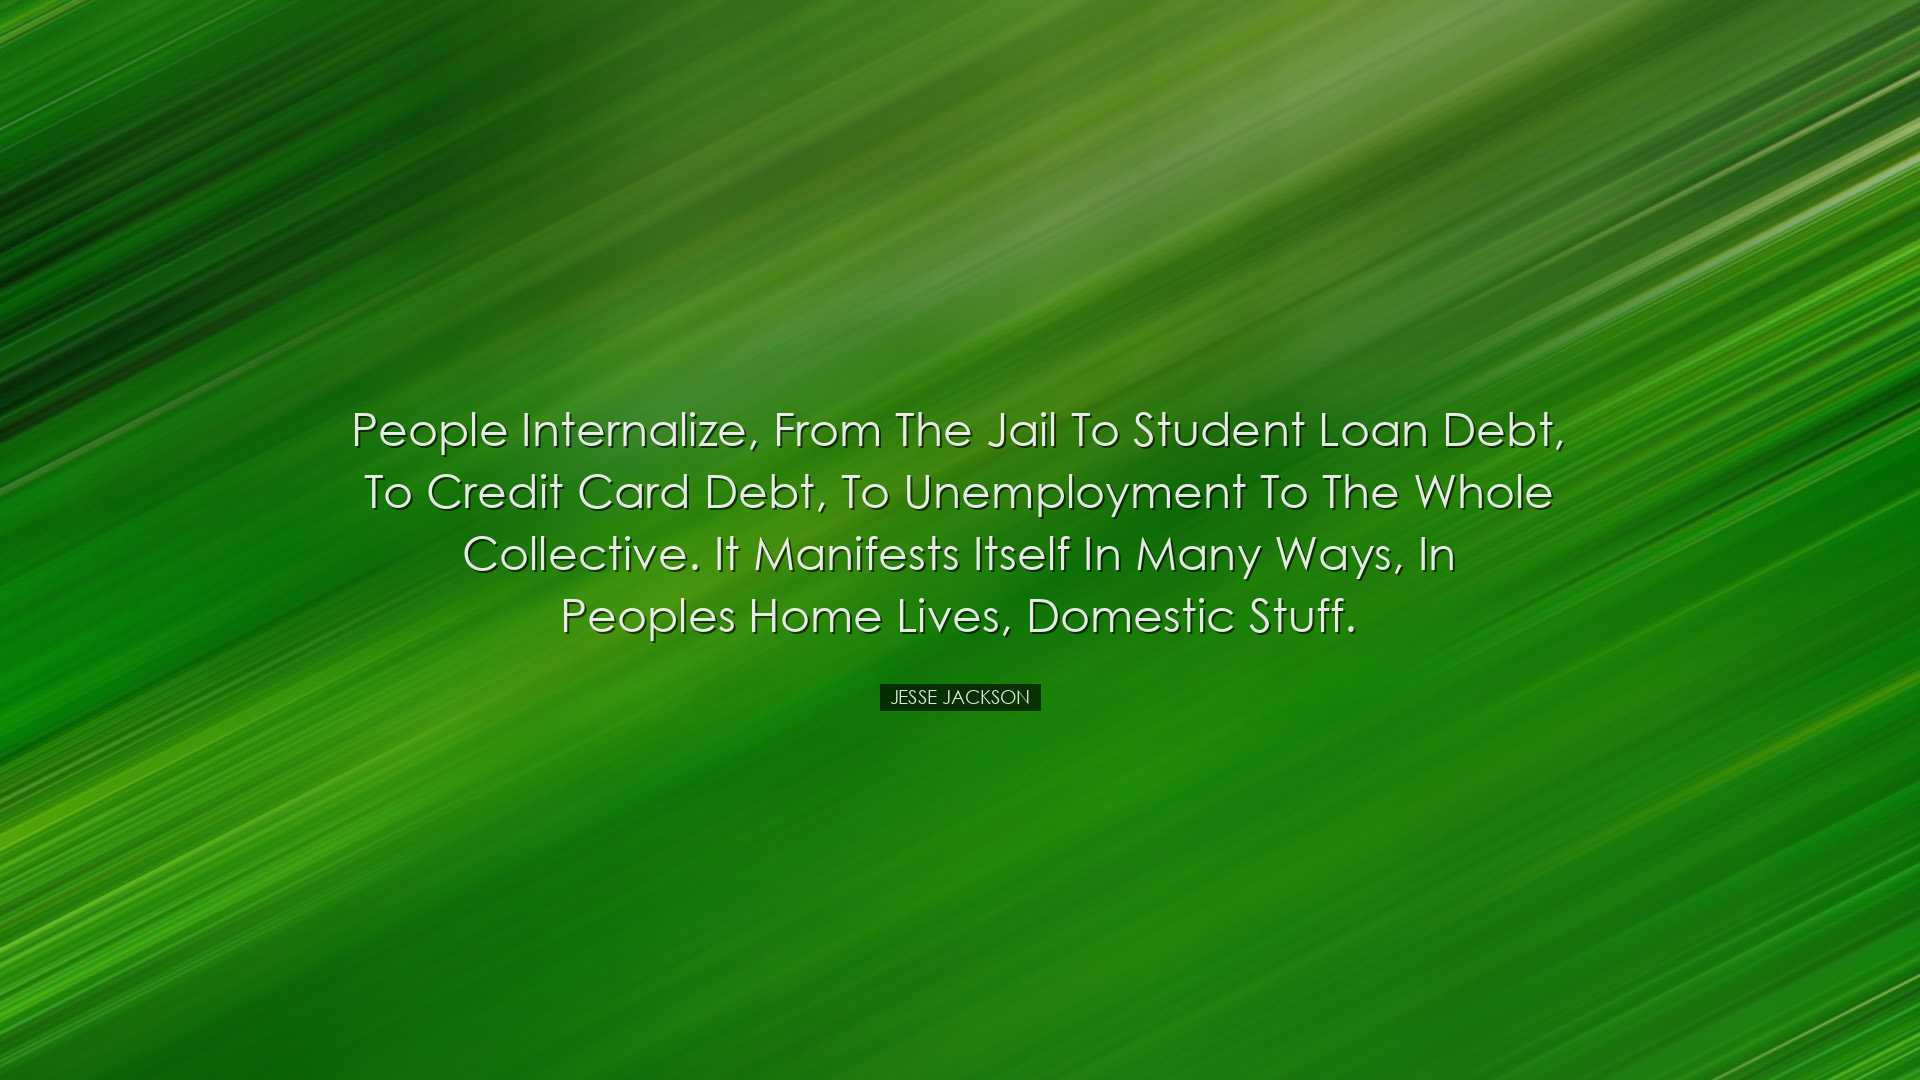 People internalize, from the jail to student loan debt, to credit